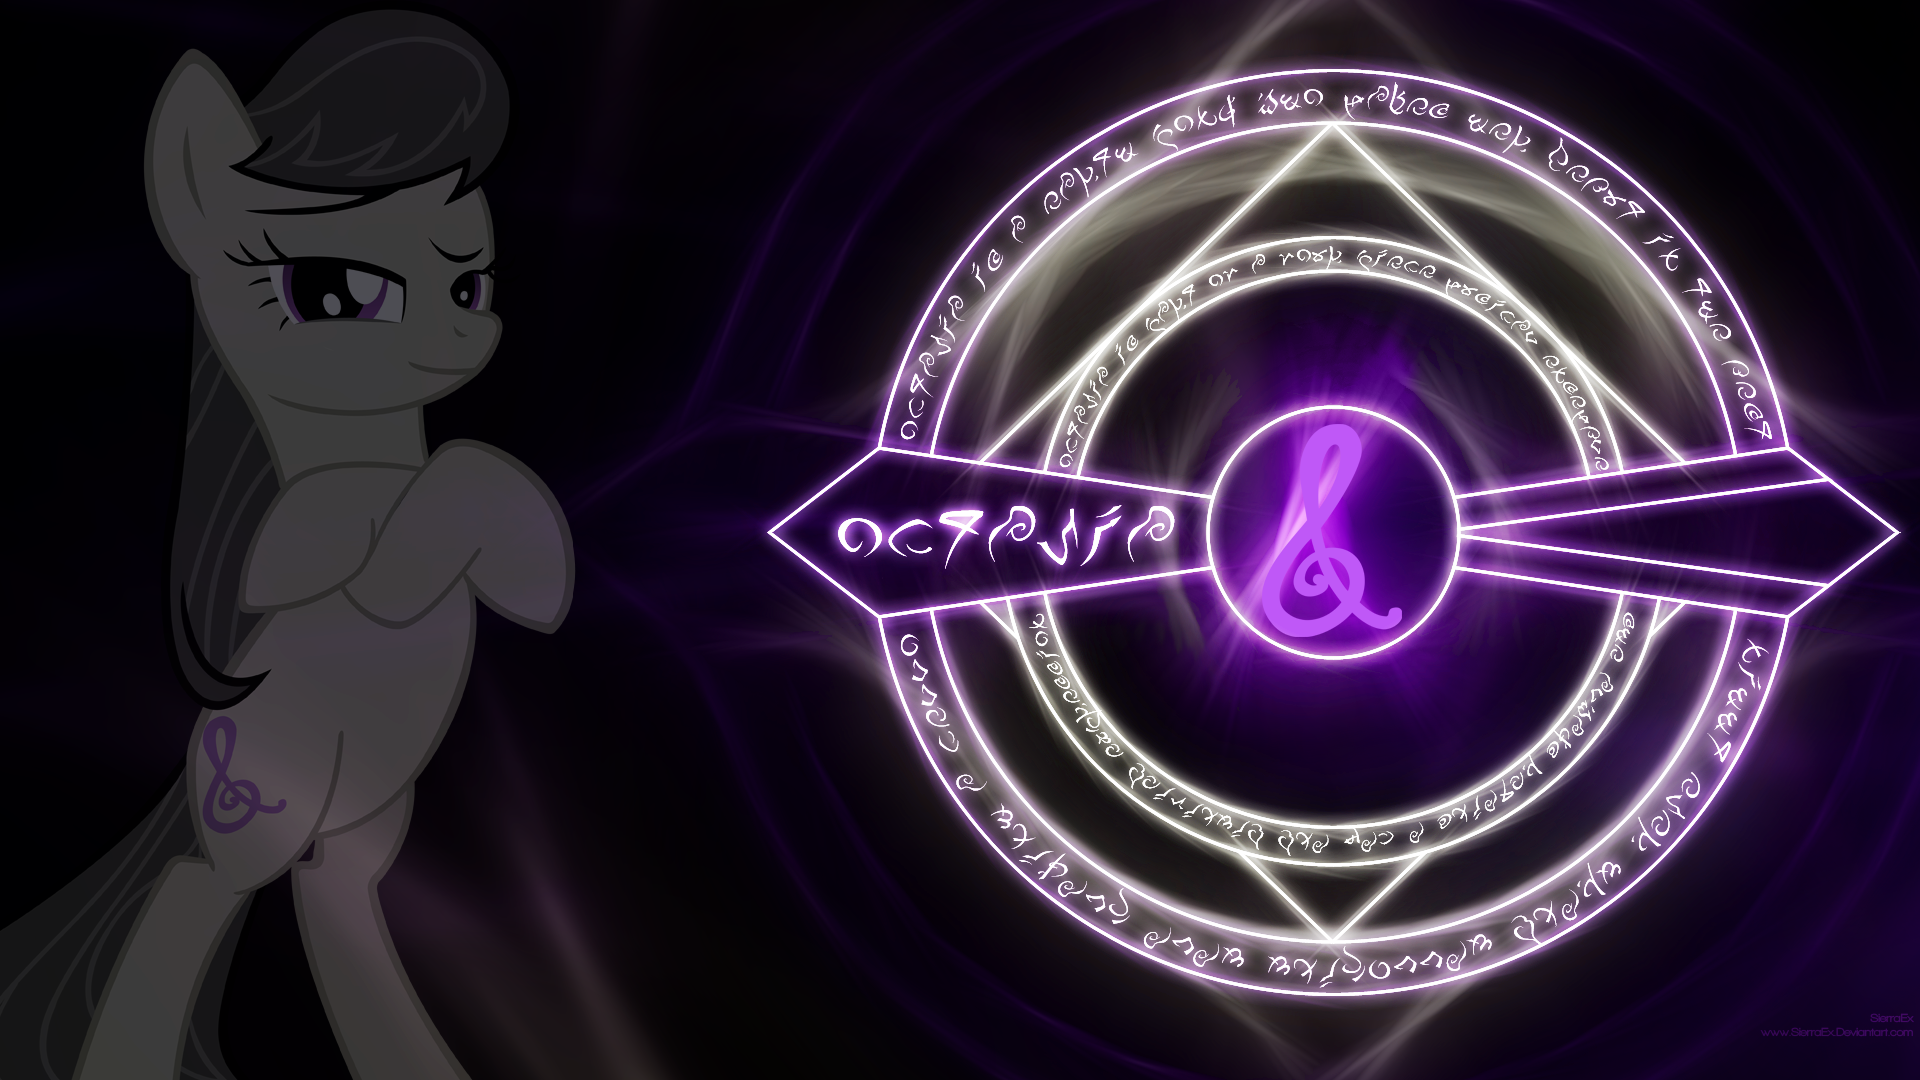 Arcane Octavia by MoongazePonies, SierraEx and The-Smiling-Pony